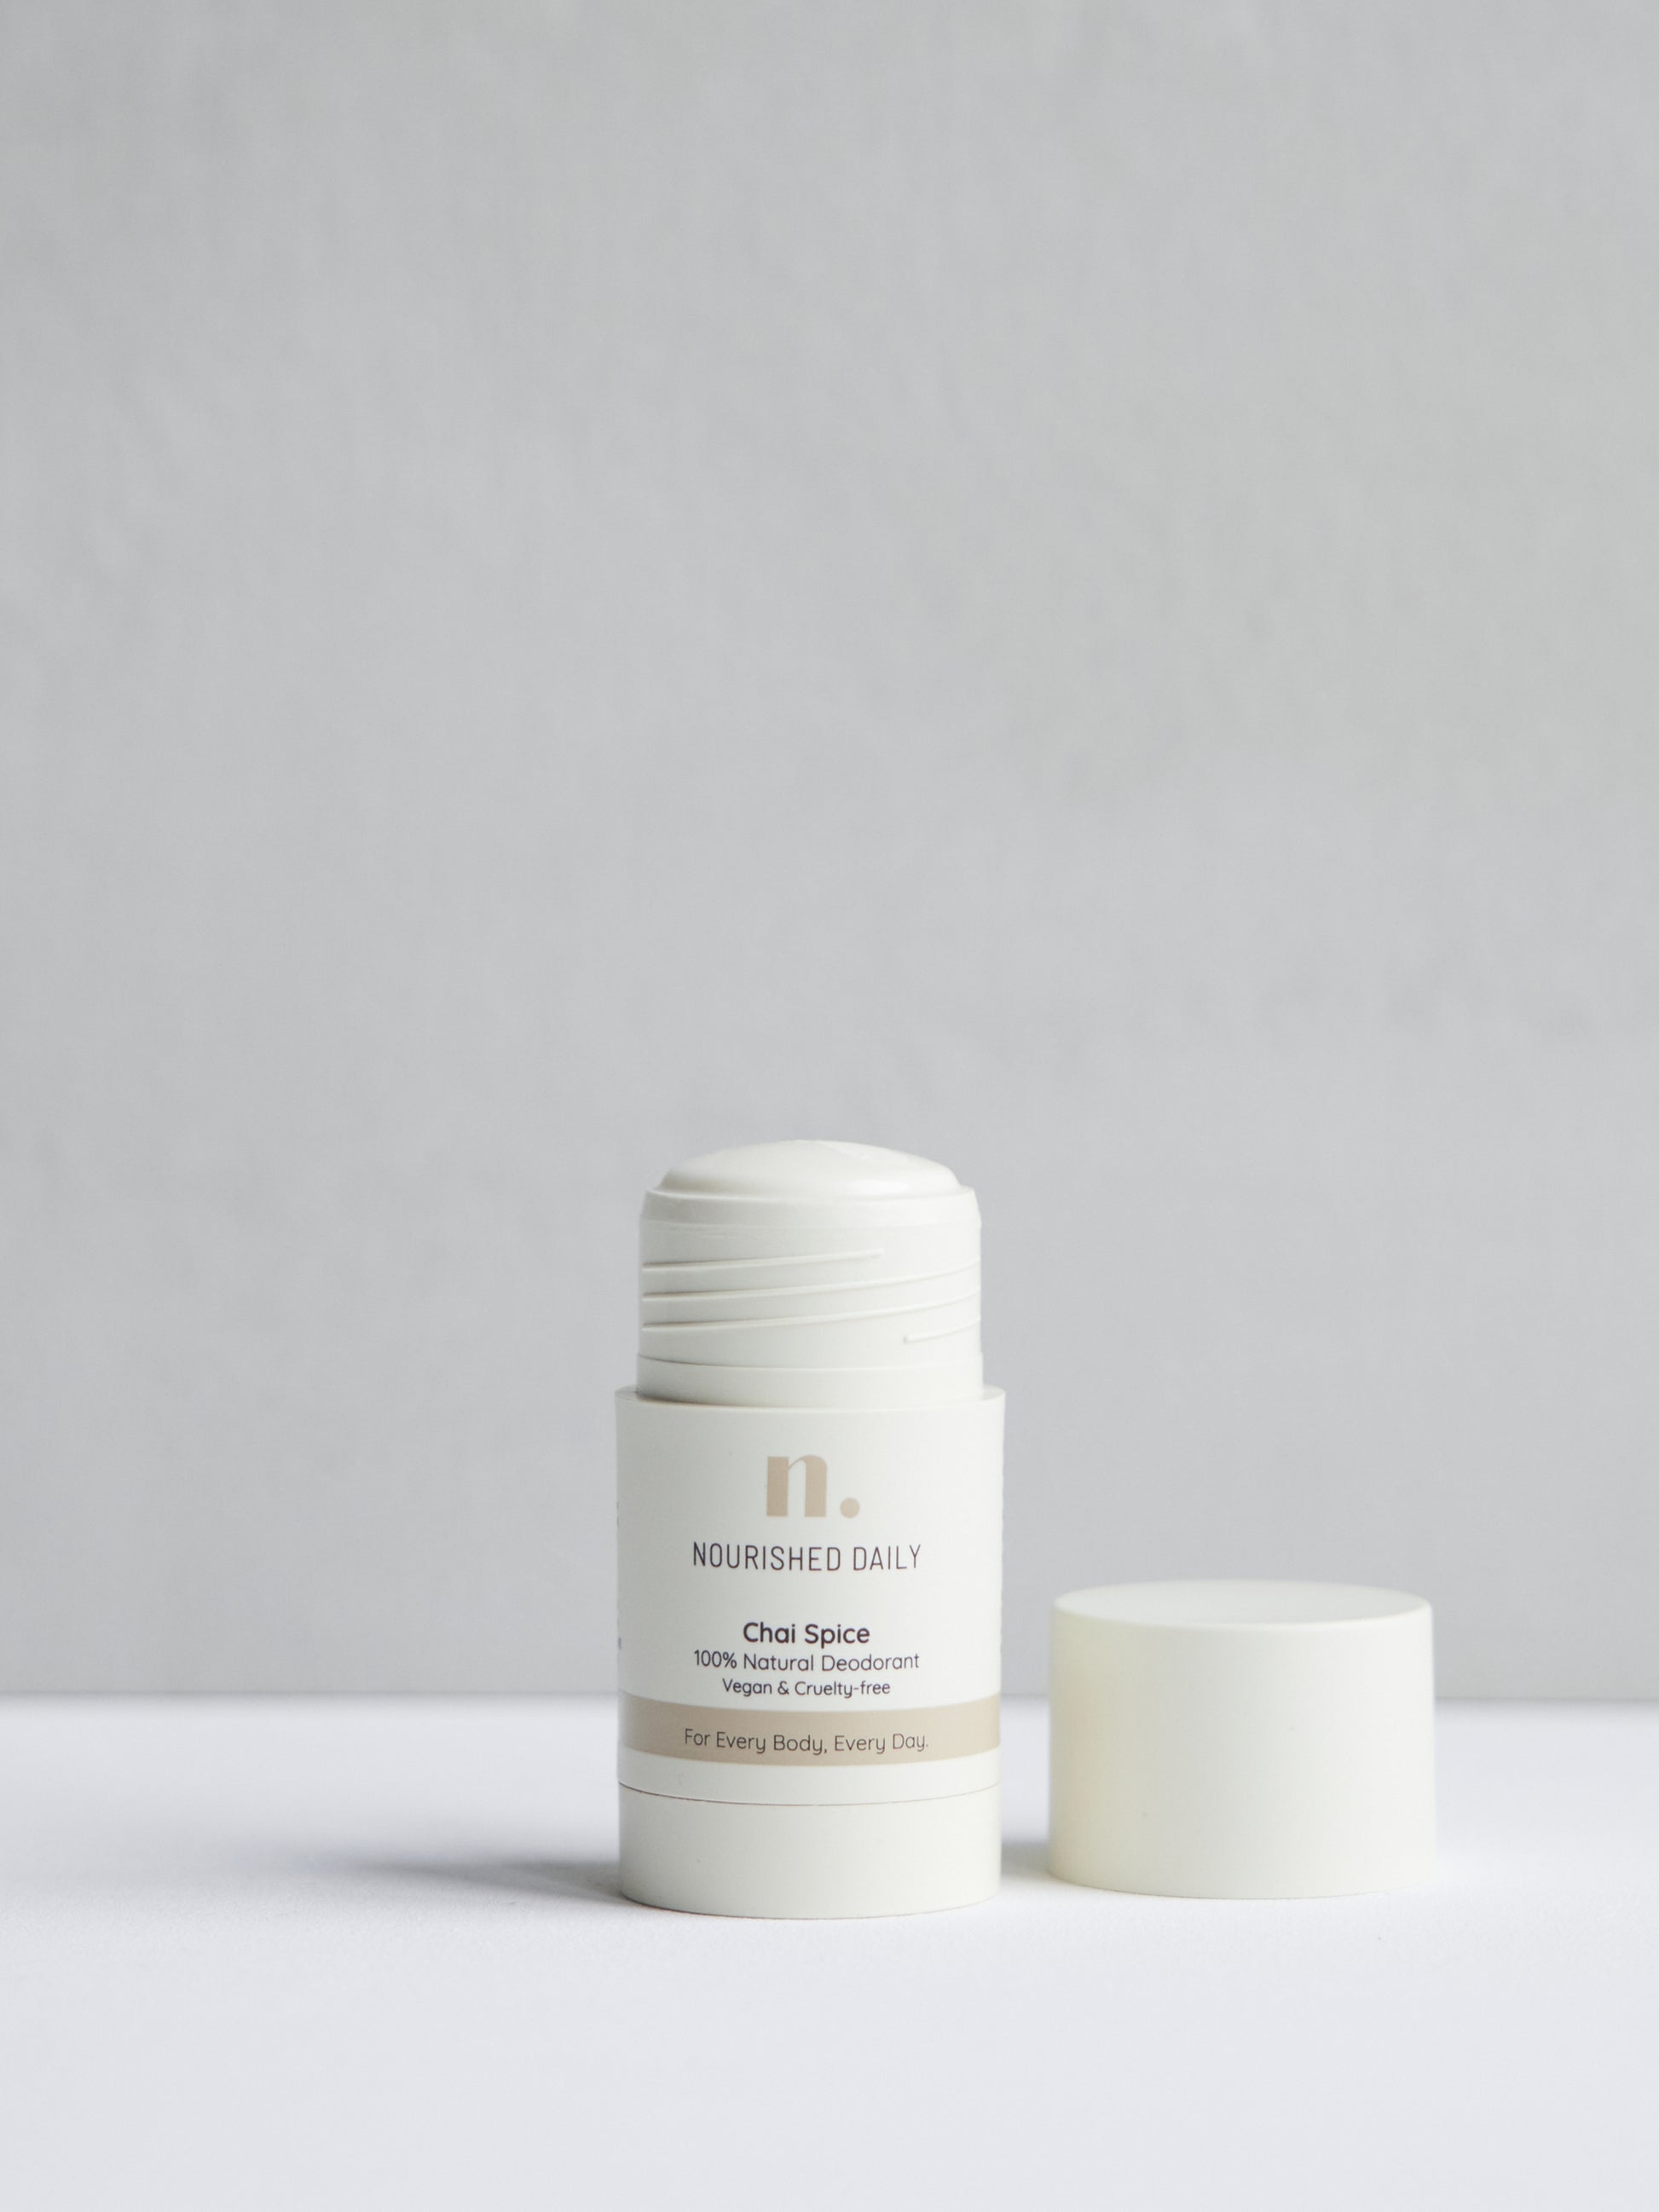 Natural Deodorant Chai Spice, Natural deodorant, Deodorant, Aluminium free deodorant, Vegan deodorant, Nourished Daily.